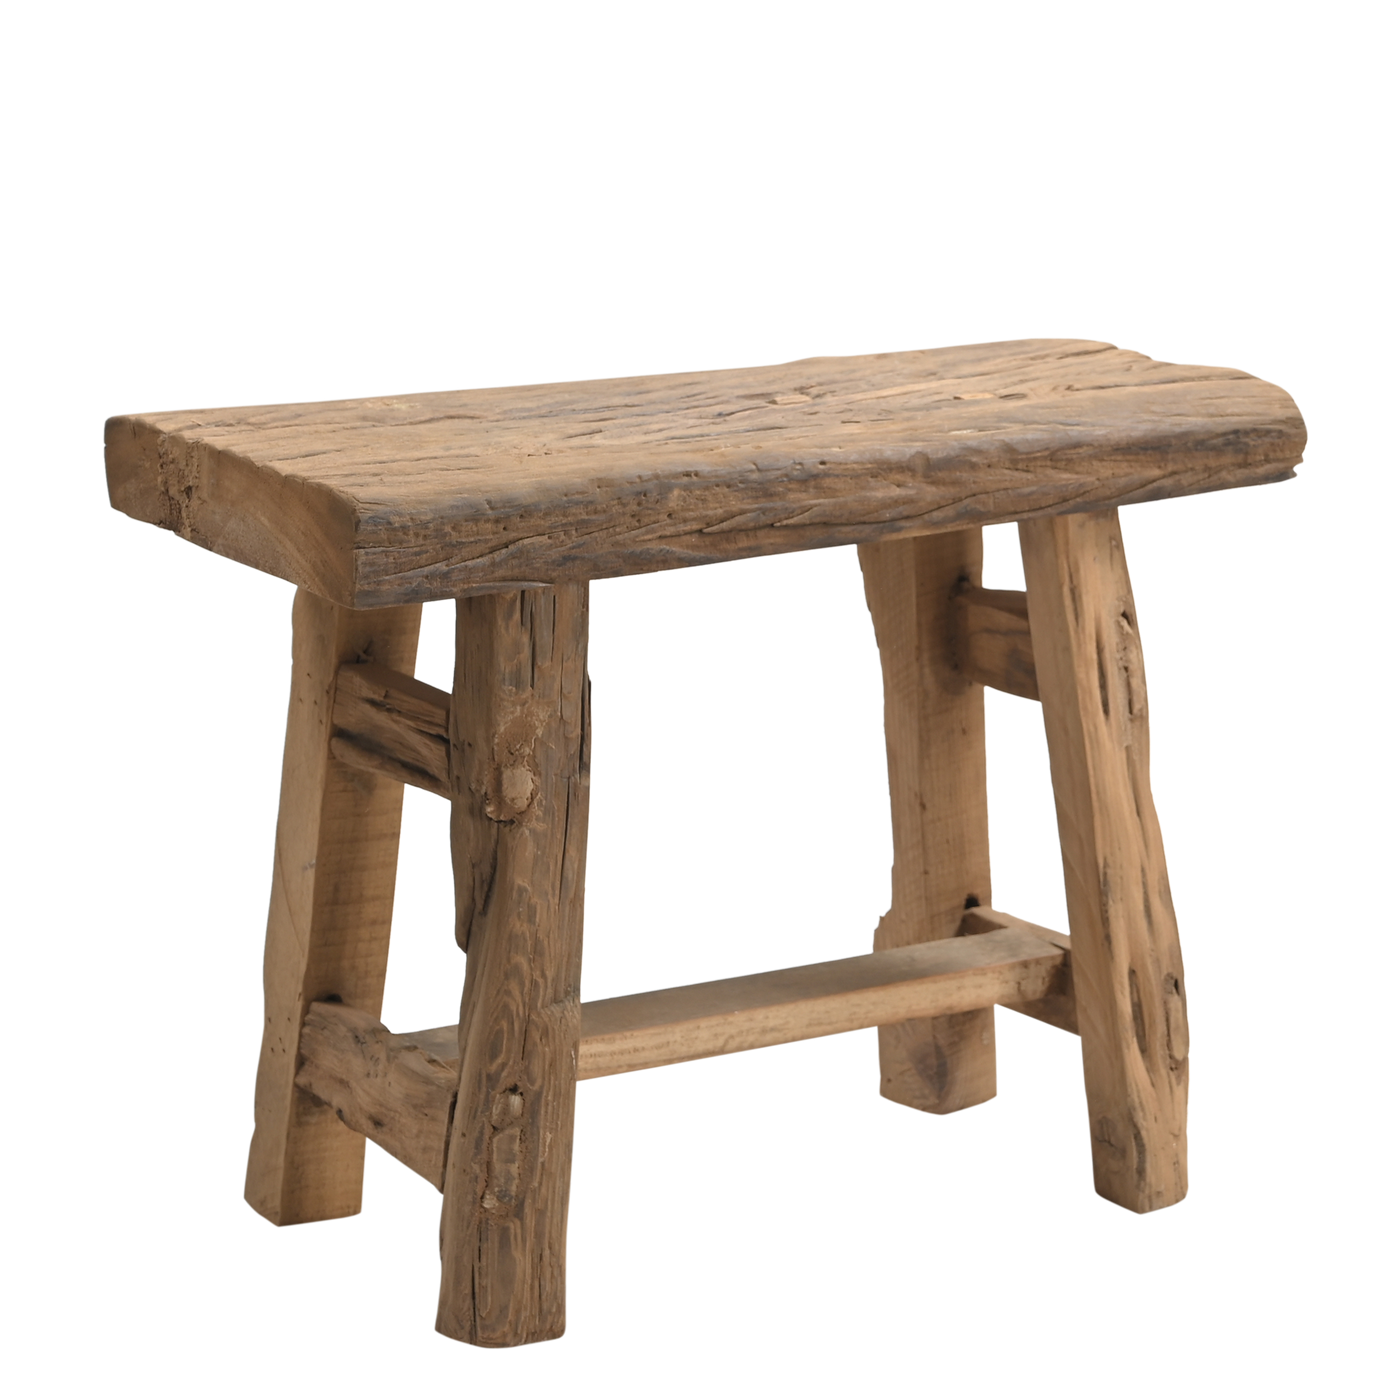 Chauki - Old wooden stool n°5